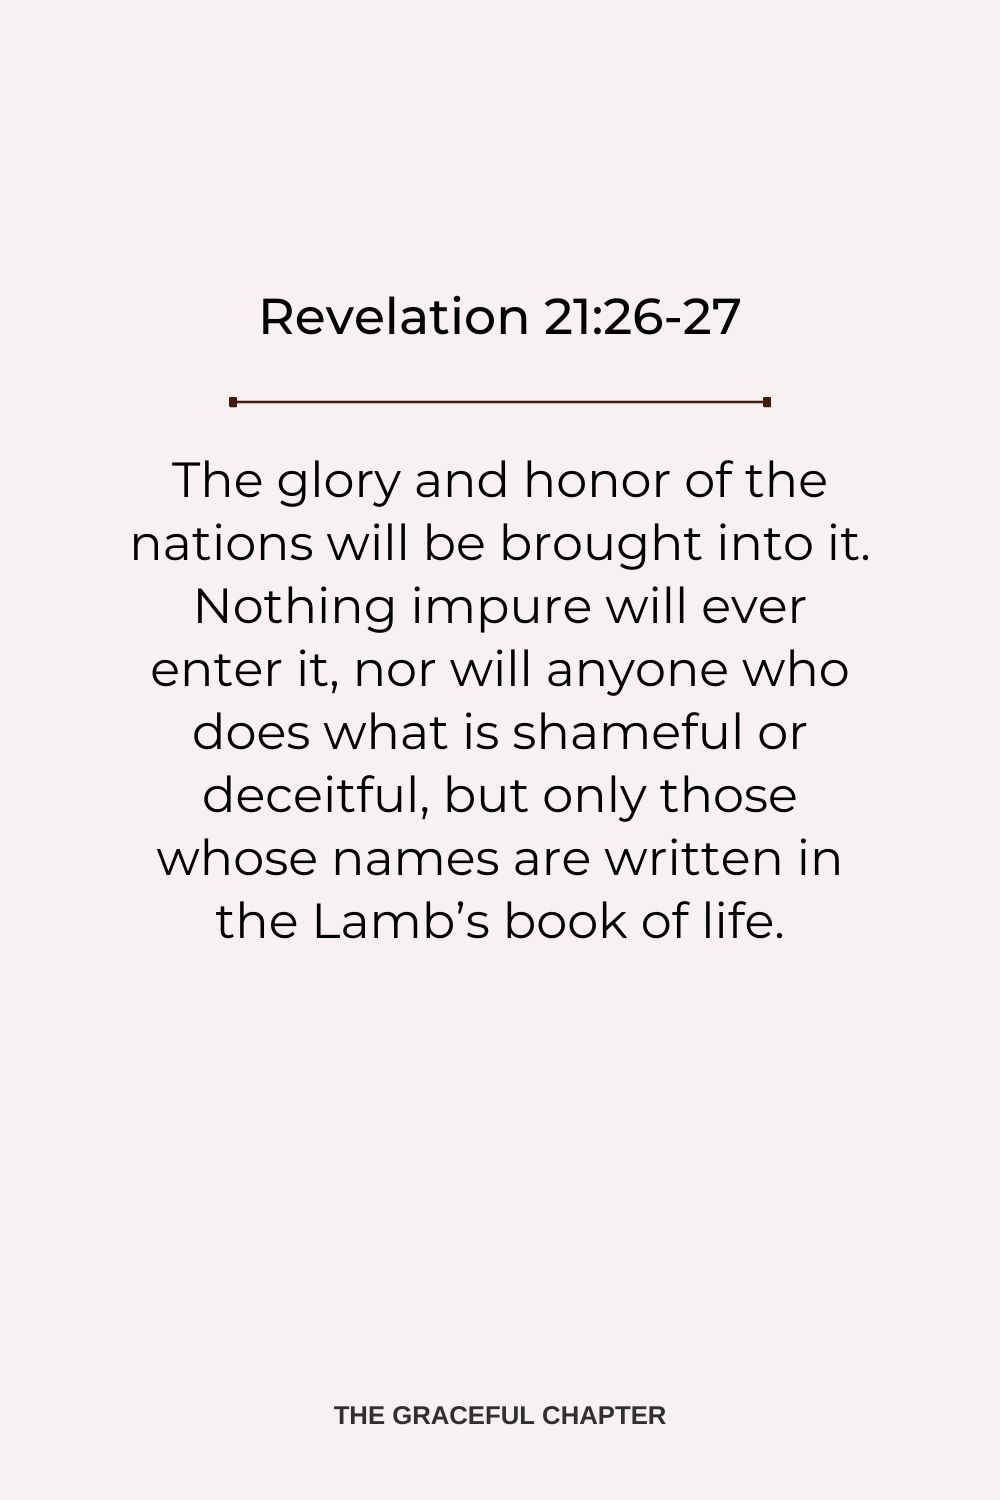 The glory and honor of the nations will be brought into it. Nothing impure will ever enter it, nor will anyone who does what is shameful or deceitful, but only those whose names are written in the Lamb’s book of life. Revelation 21:26-27